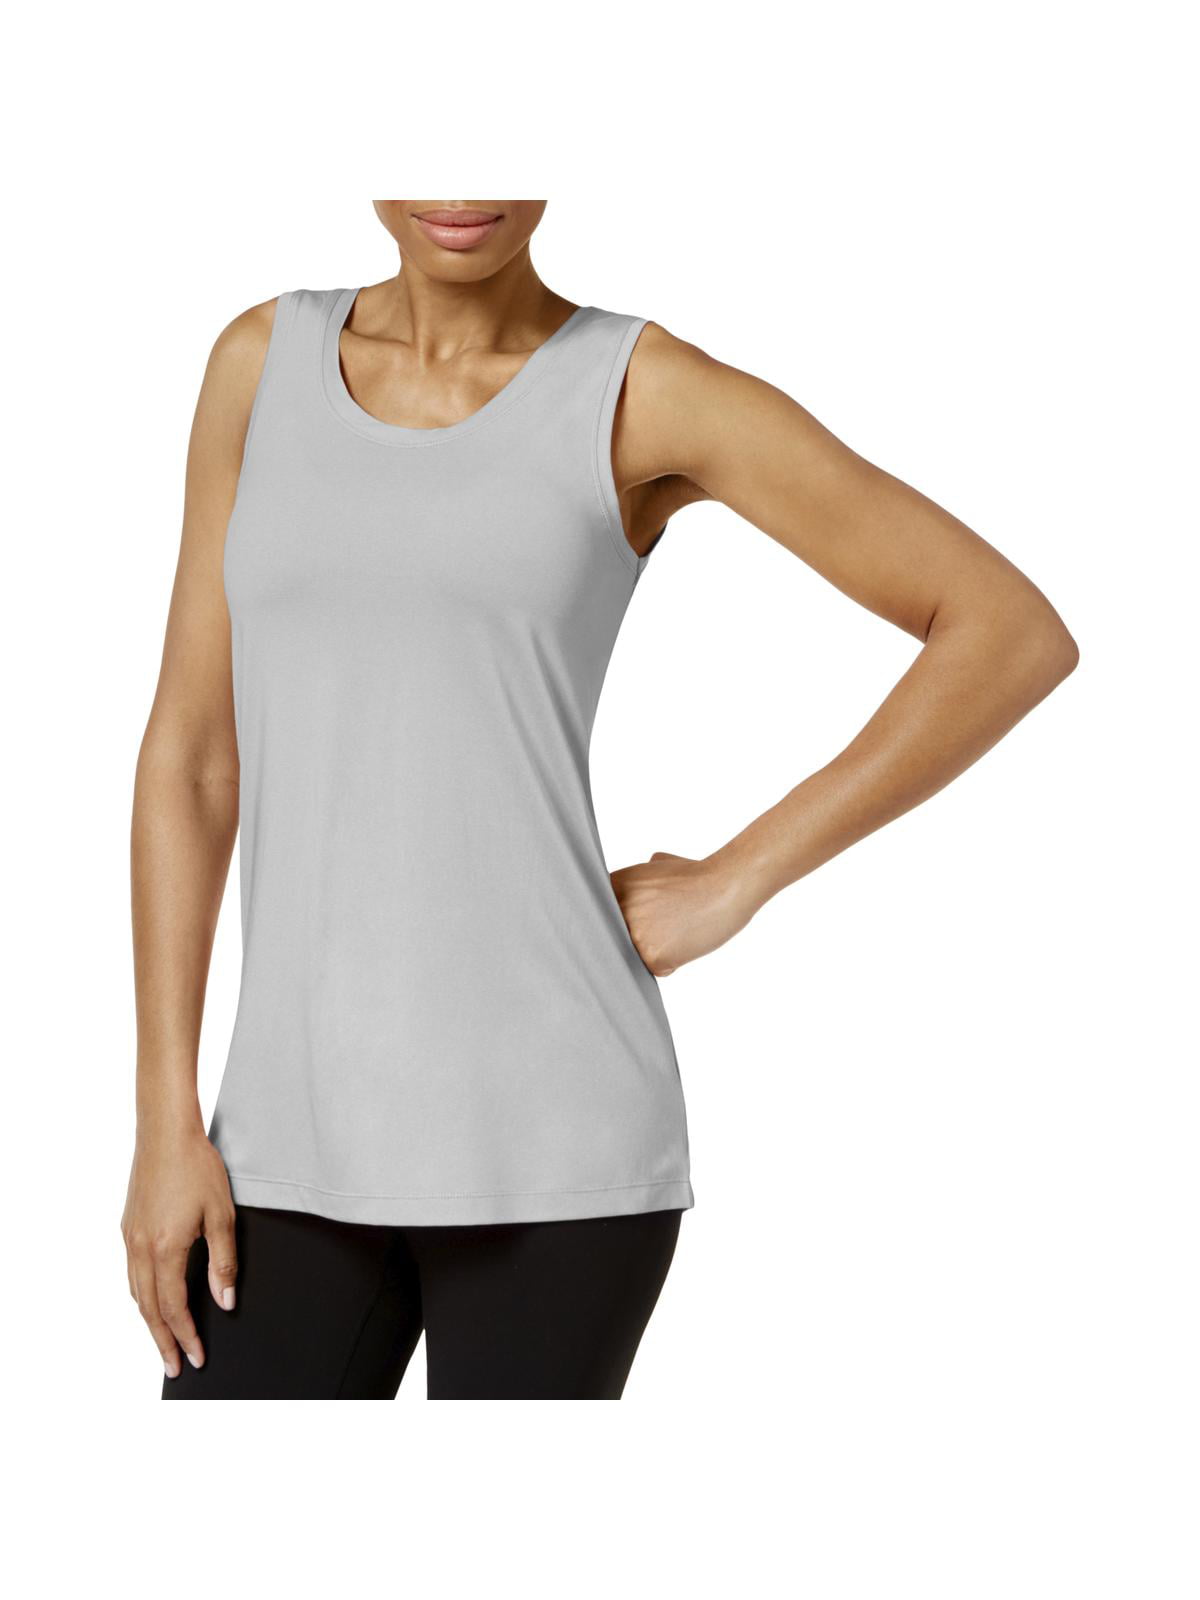 Long Sleeve Activewear Top w/Side Slits Gaiam Womens Strappy Open Back Yoga Shirt